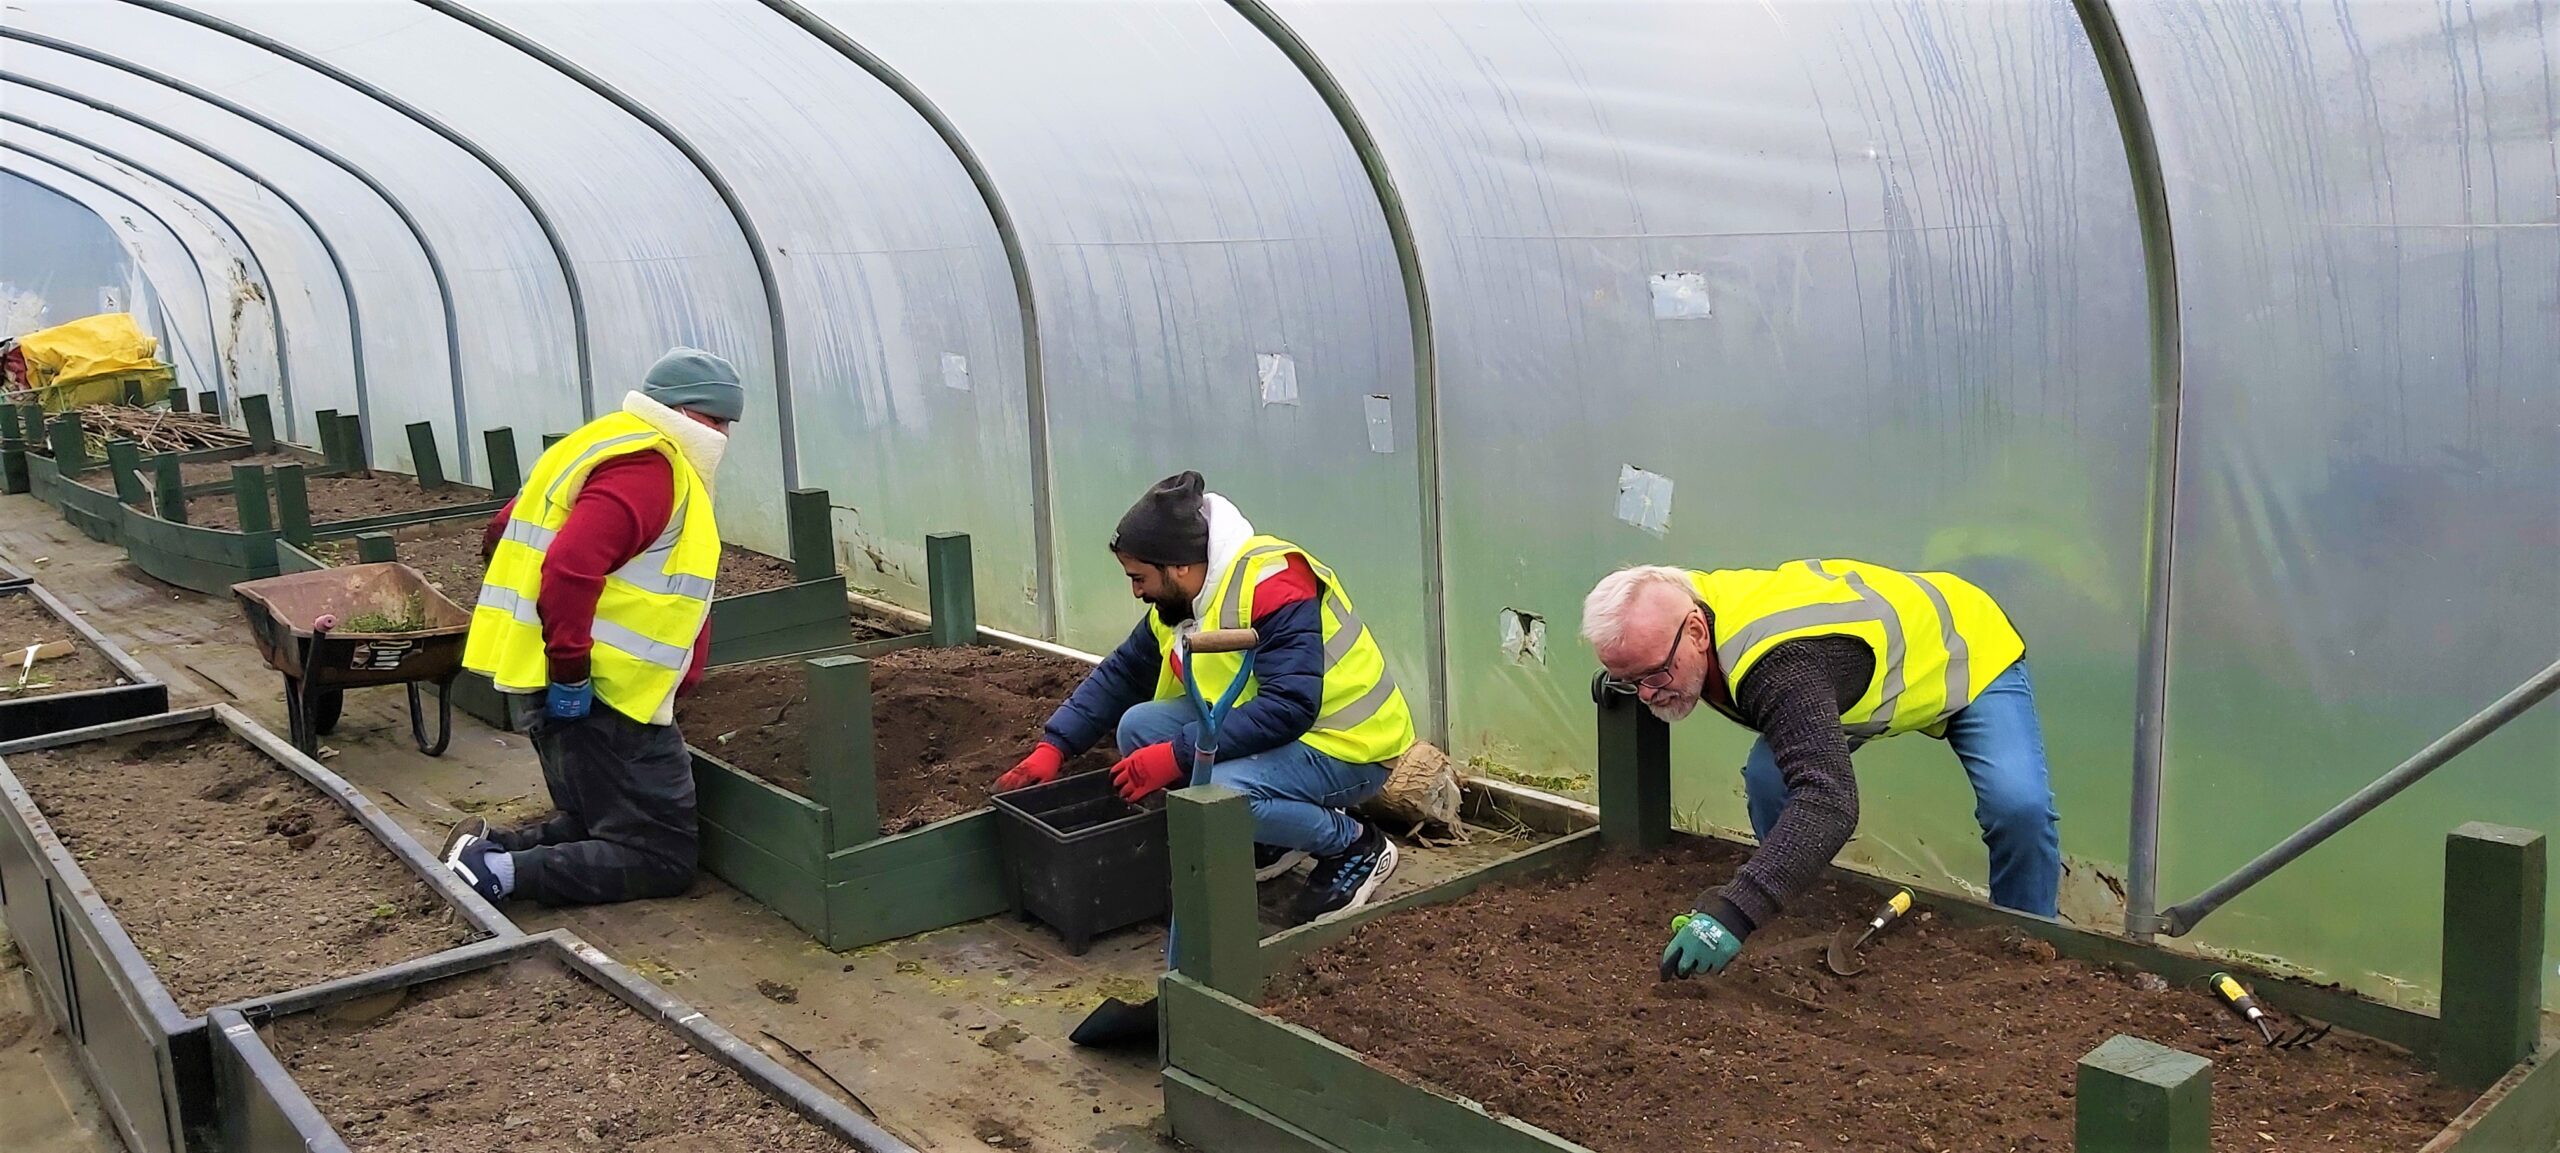 service users planting raised beds